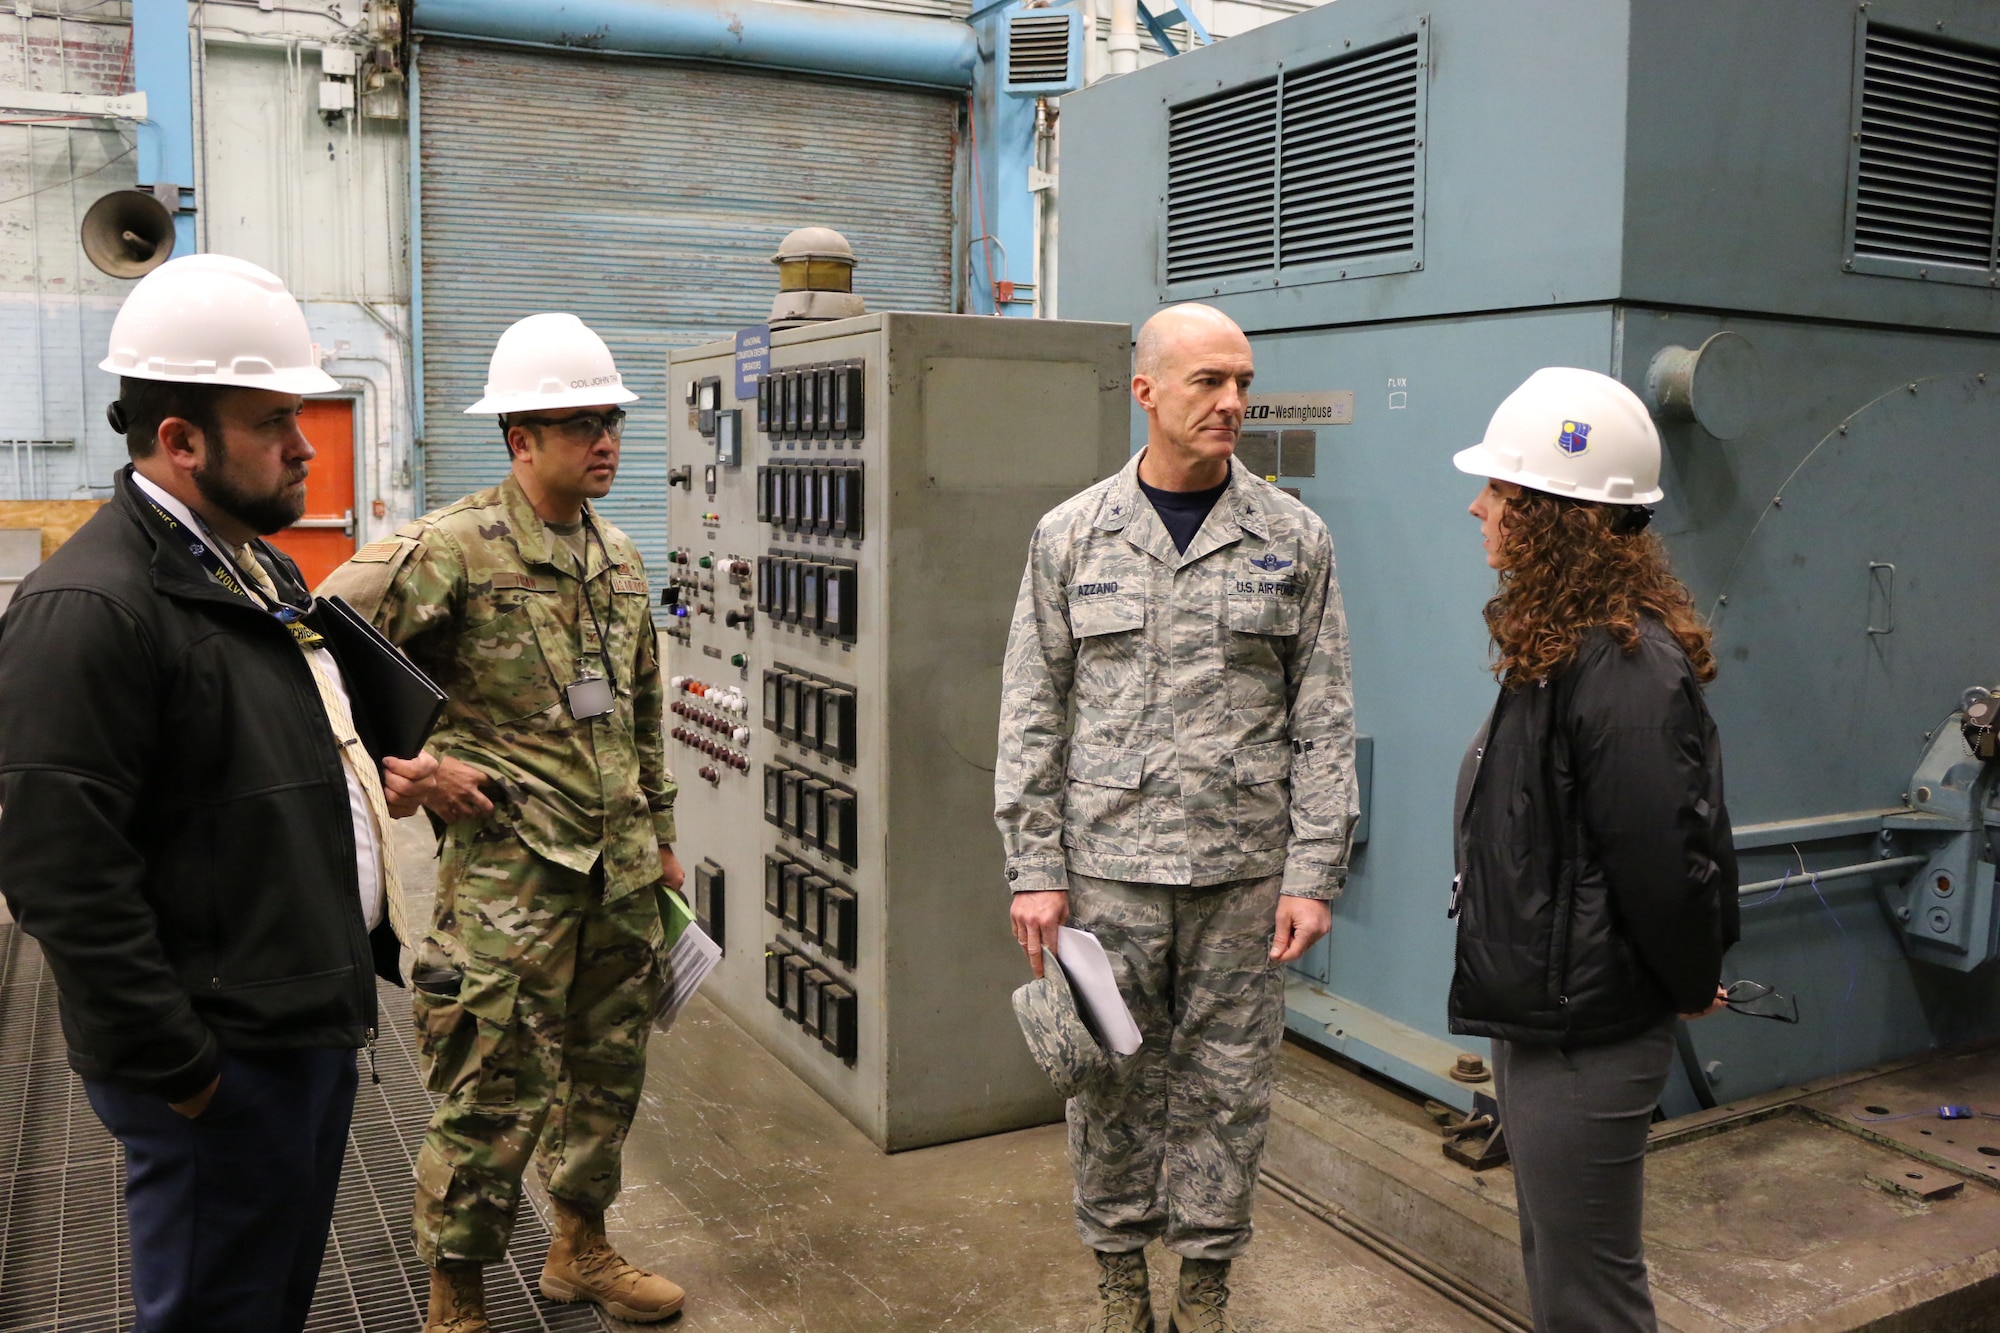 Brig. Gen. Christopher Azzano, commander of the Air Force Test Center, second from right, receives an update on upcoming Service Life Extension Program projects at AEDC from TSS Capital Improvements Lead Engineer and SLEP Manager Kathleen Bajar, right. Also pictured are TSS Capital Improvements Technical Advisor Josh Meeks, left, AEDC Test Systems Sustainment Chief Col. John Tran. Azzano and other AFTC leadership visited Arnold Air Force Base in mid-November to take part in the 2018 AFTC Strategic Offsite, Azzano’s first offsite since assuming the role of AFTC commander in August. (U.S. Air Force photo by Brad Hicks) (This image was altered by obscuring badges for security purposes)